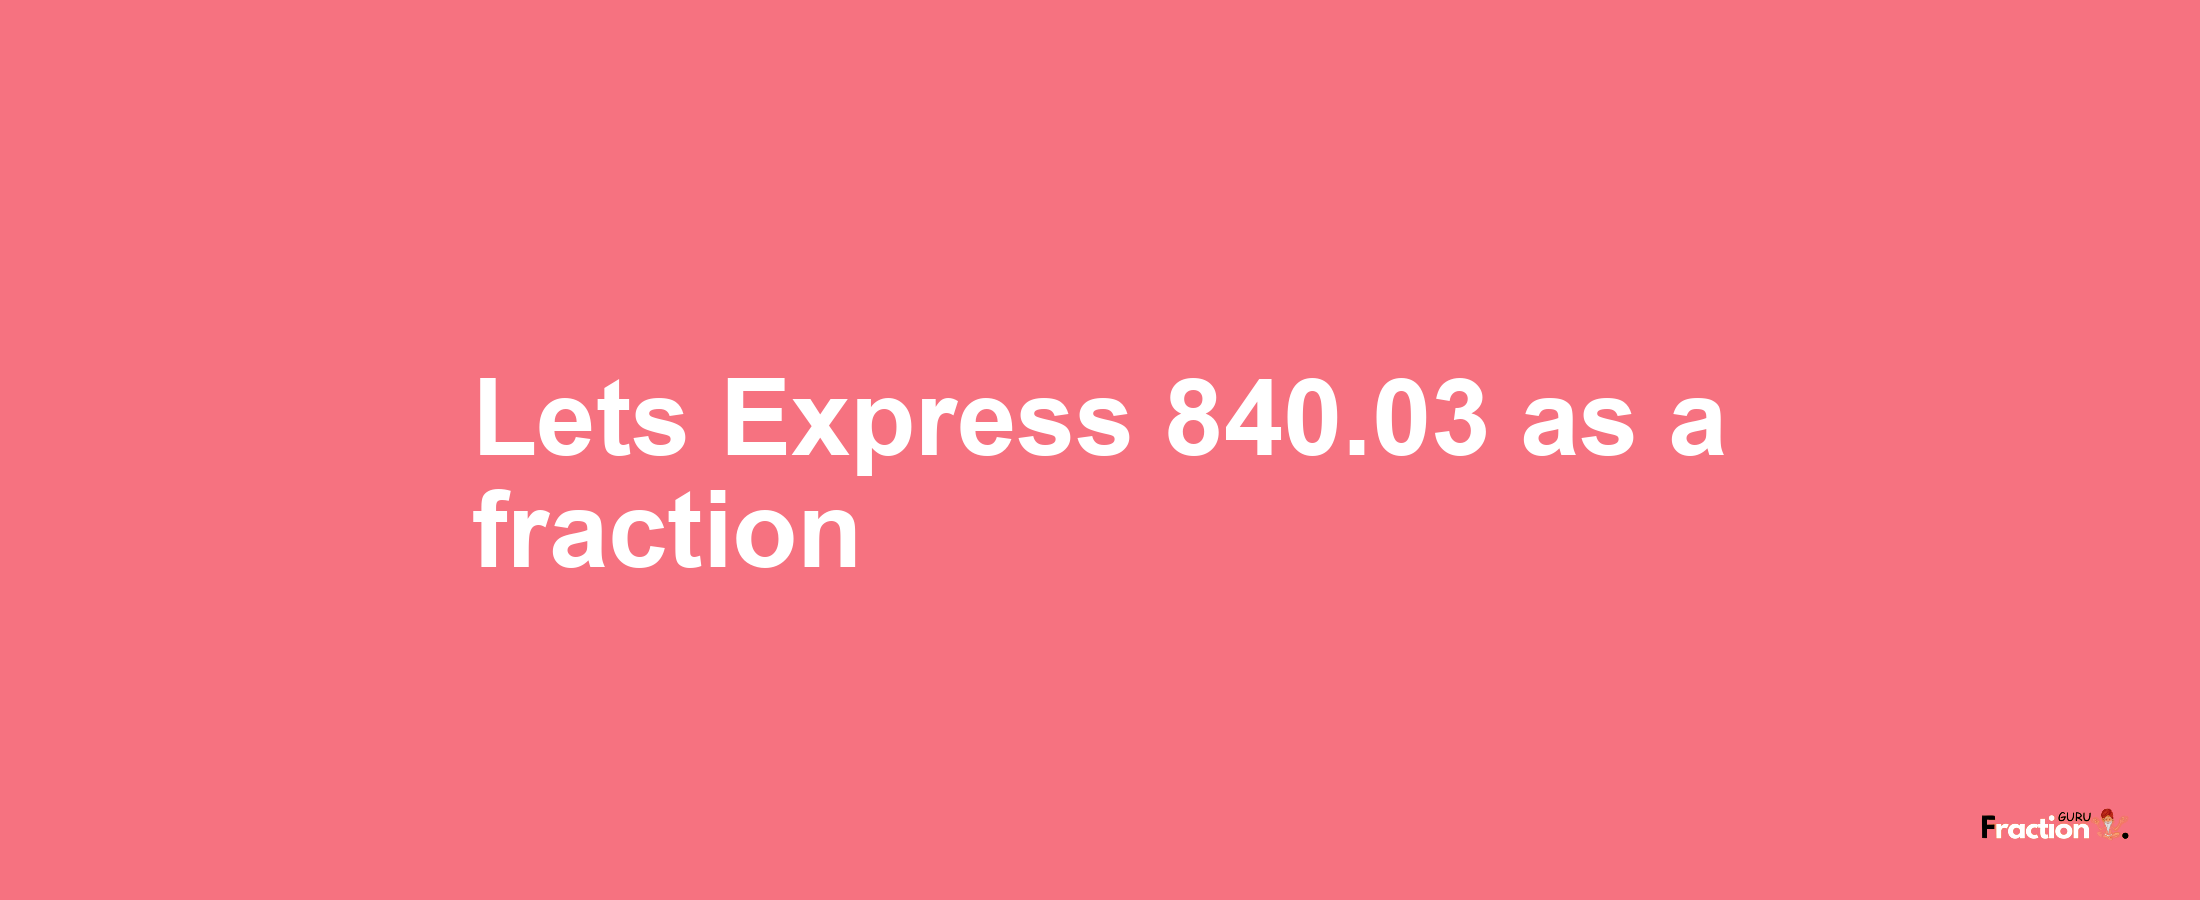 Lets Express 840.03 as afraction